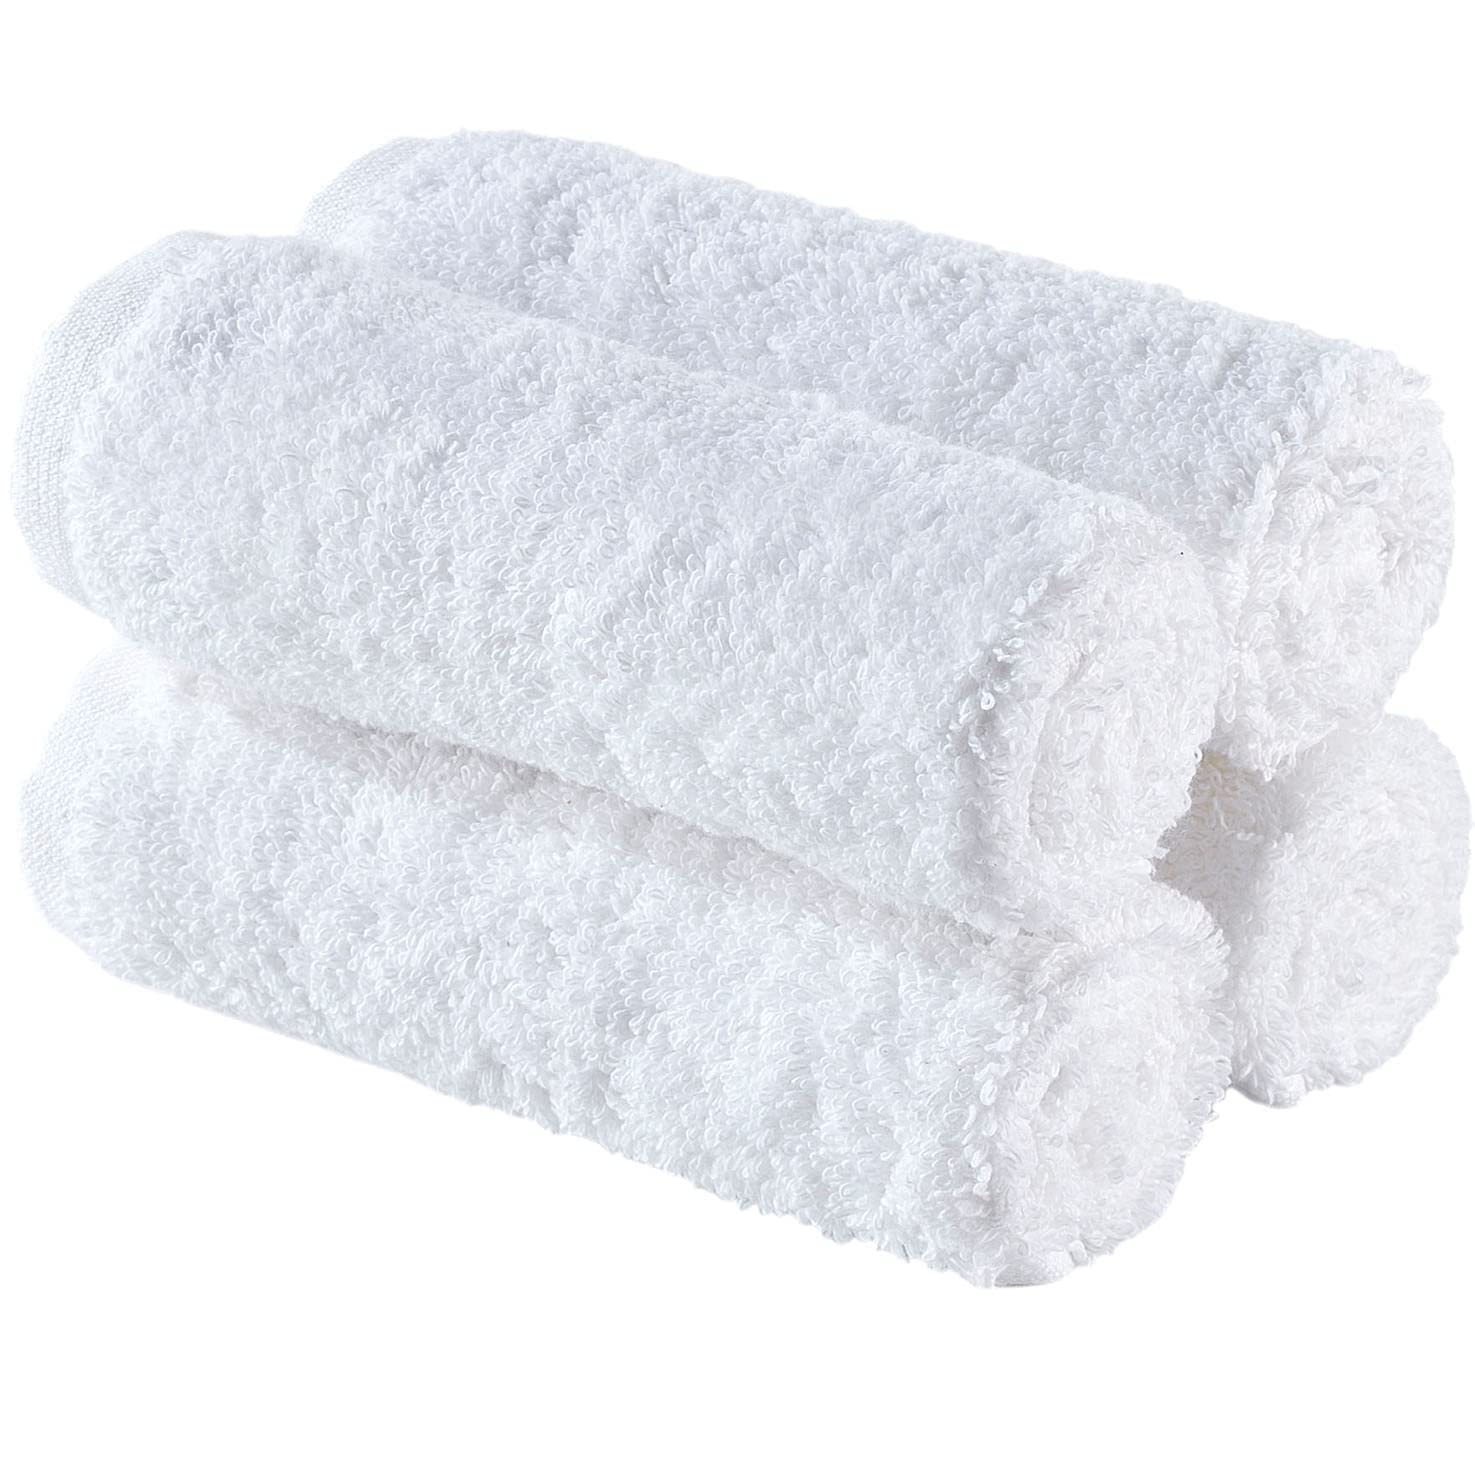 Hammam Linen 100% Cotton Towels Soft and Absorbent (White, Hand Towels)